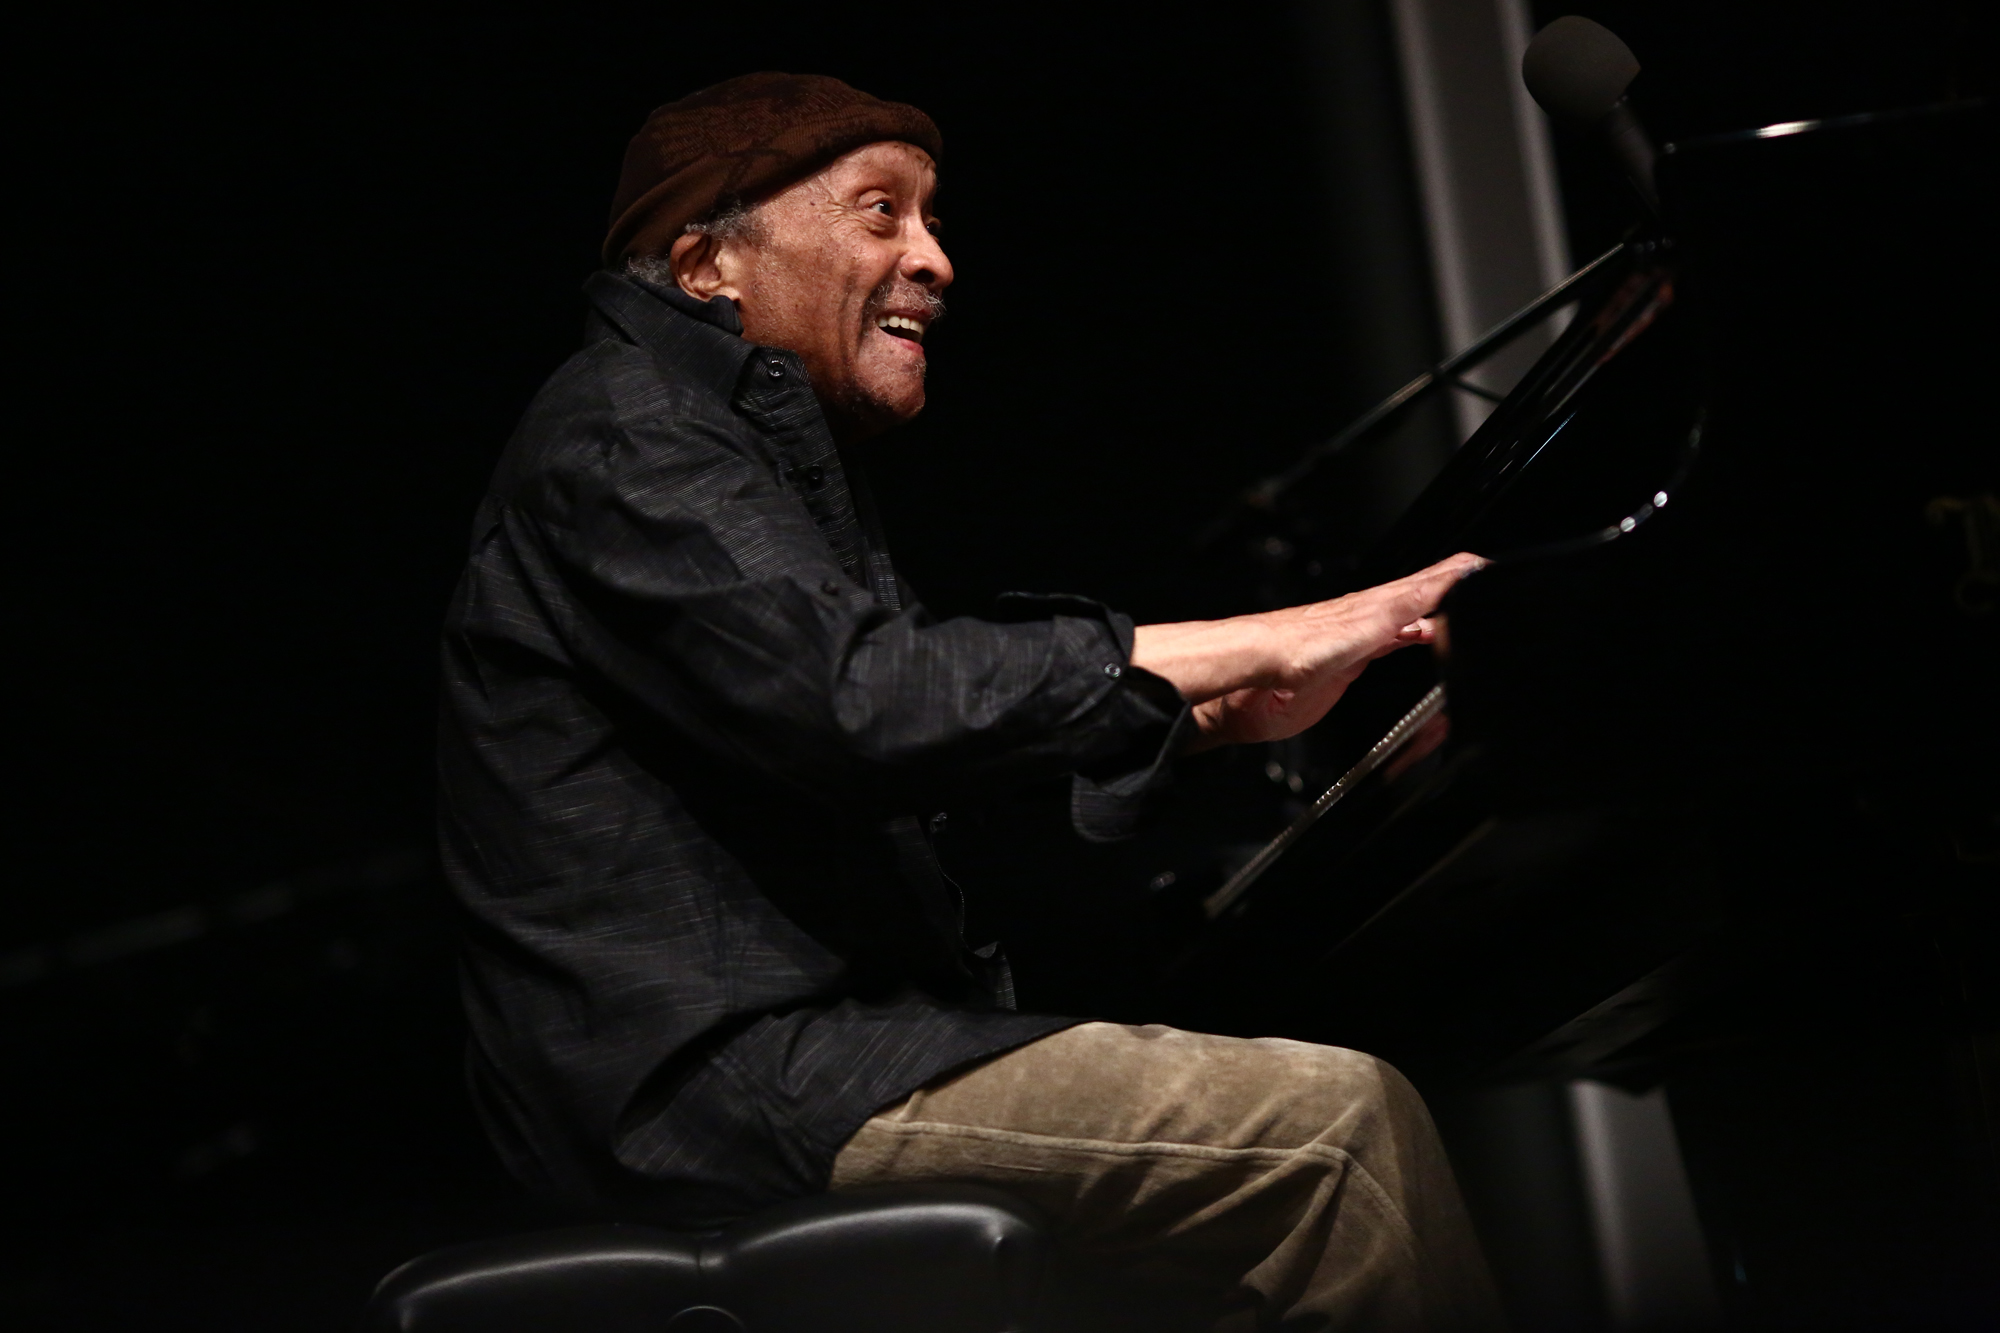 Cecil Taylor at the piano during Open Plan: Cecil Taylor on April 14 2016 at The Whitney Museum of American Art. Photograph © Paula Court. courtesy The Whitney Museum 